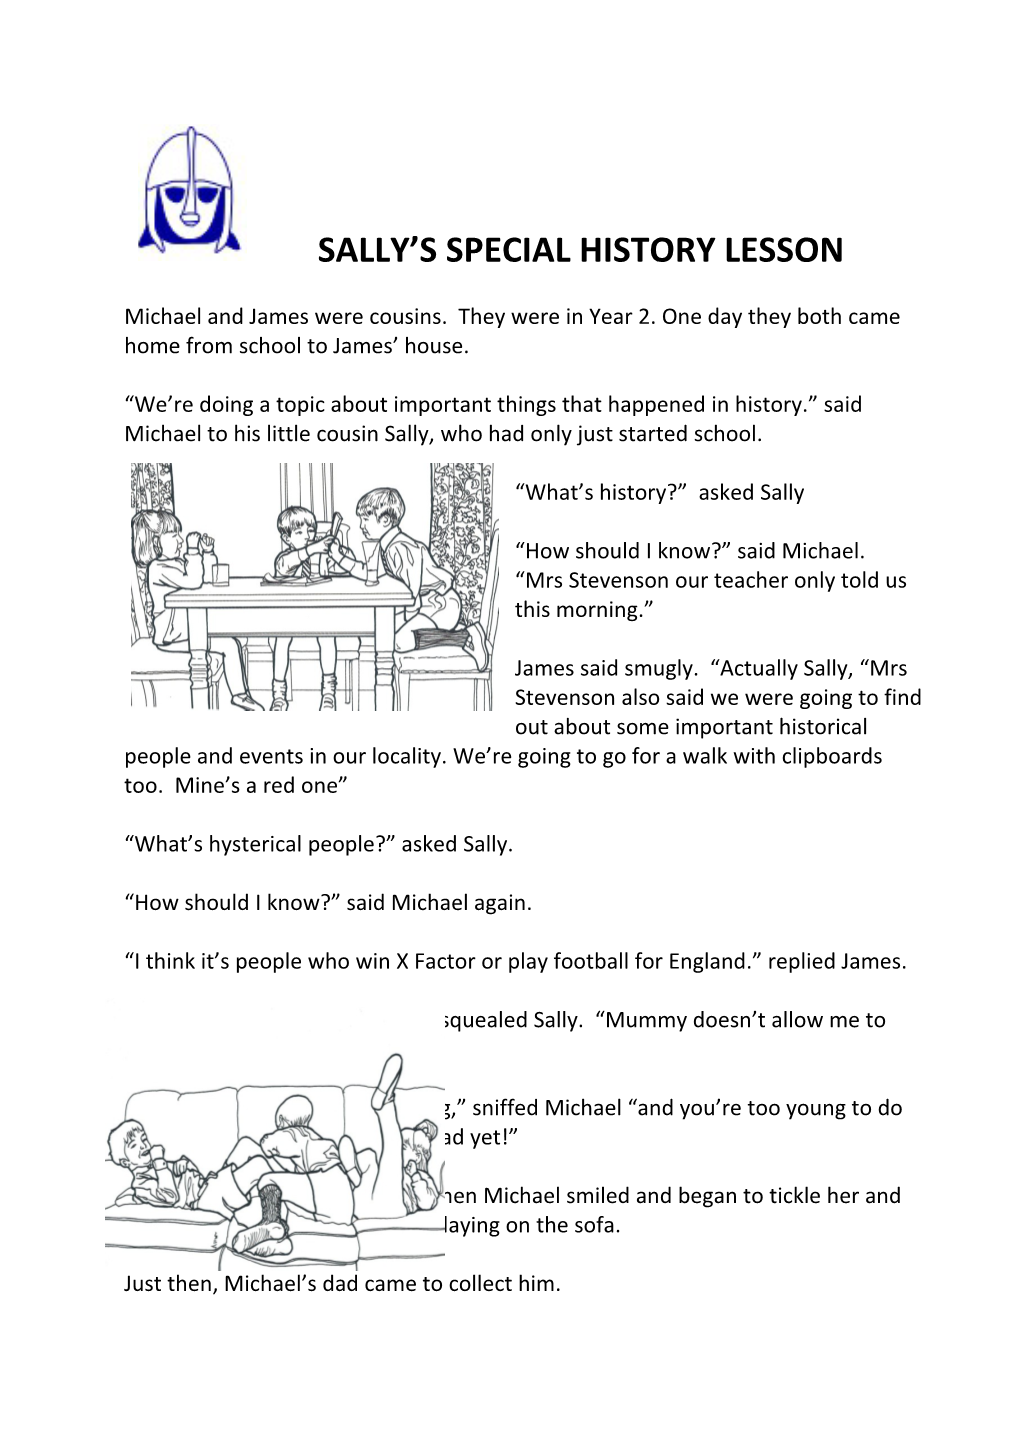 What S History? Asked Sally